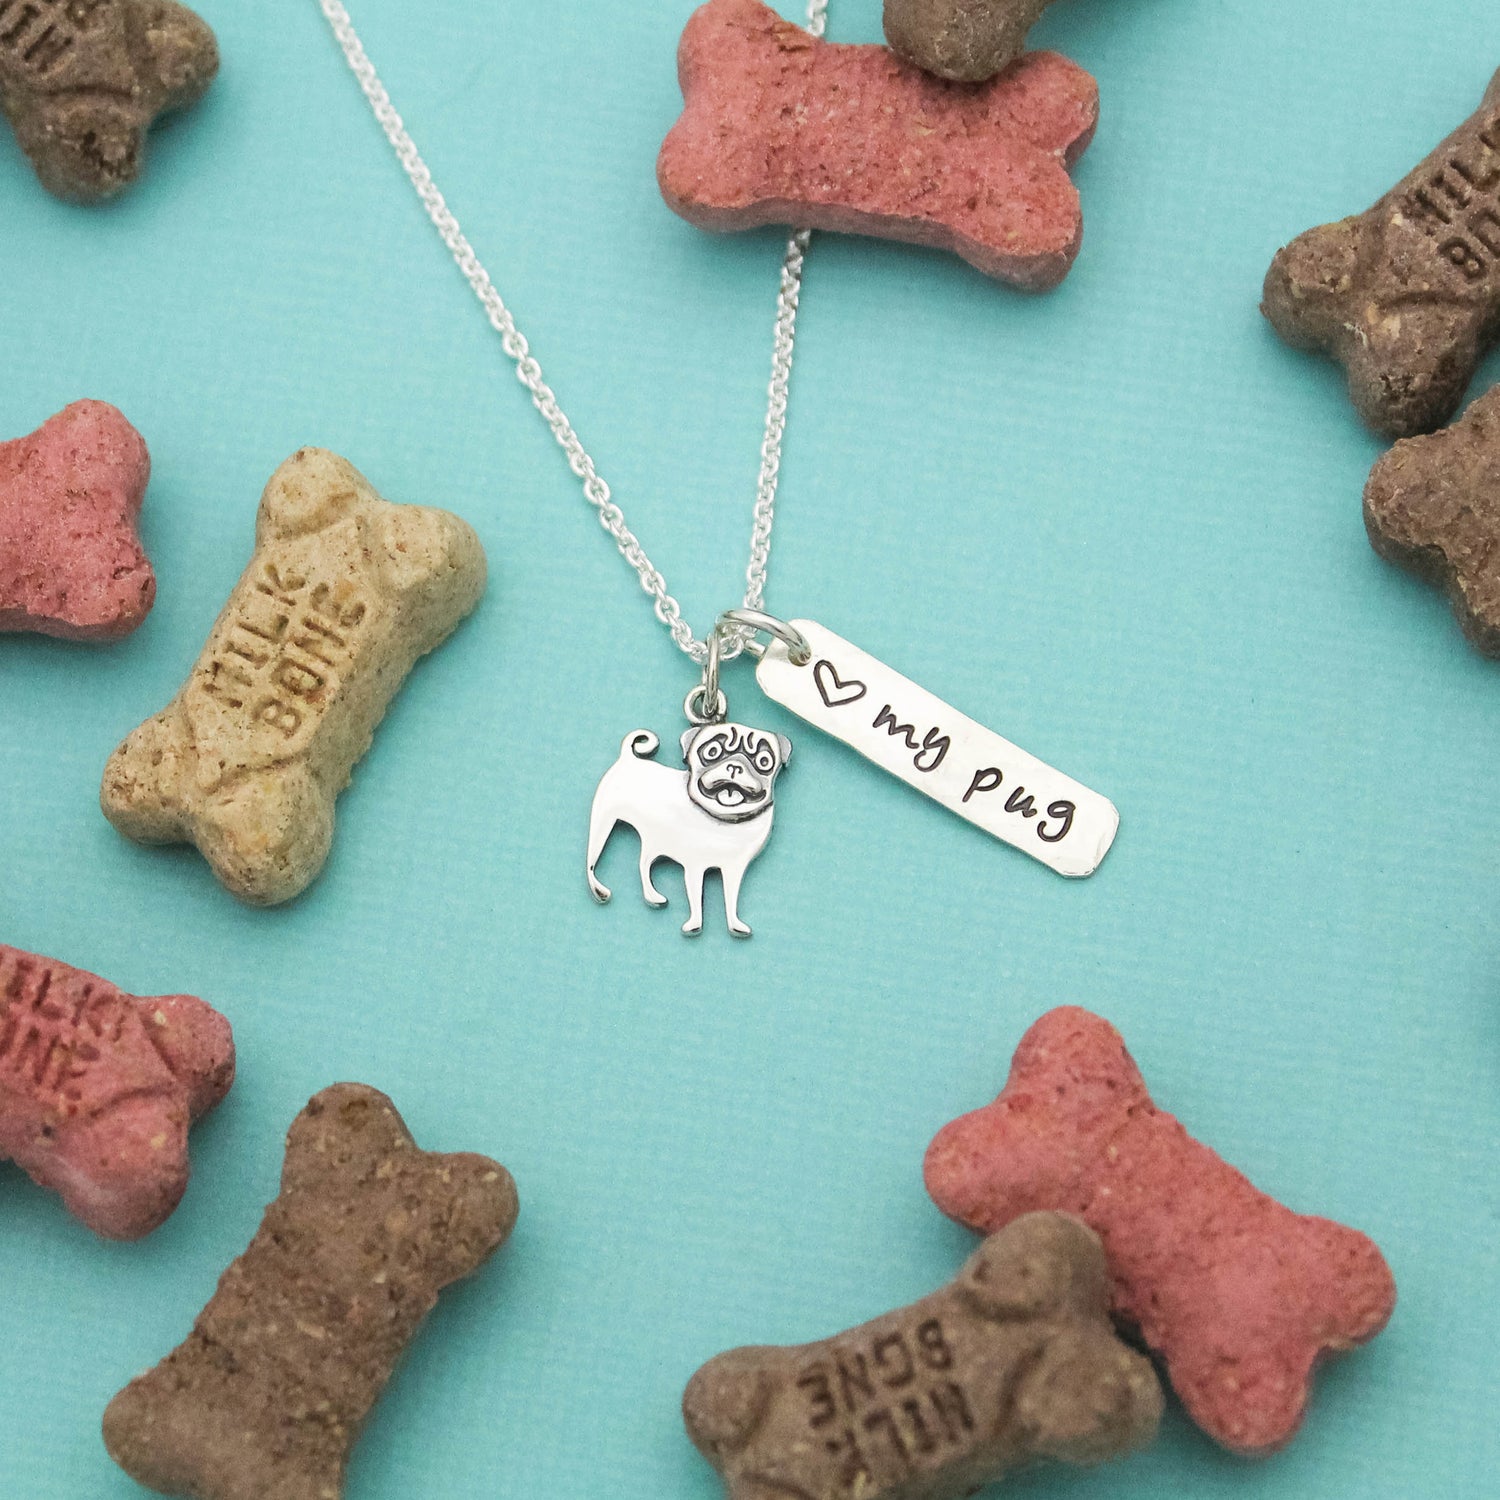 LOVE my PUG Necklace, Sterling Silver Dog Necklace, Pug Lover Gift, New Pet Gift, Dog Pug Jewelry, Pug Necklace, Hand Stamped, Pug Charm